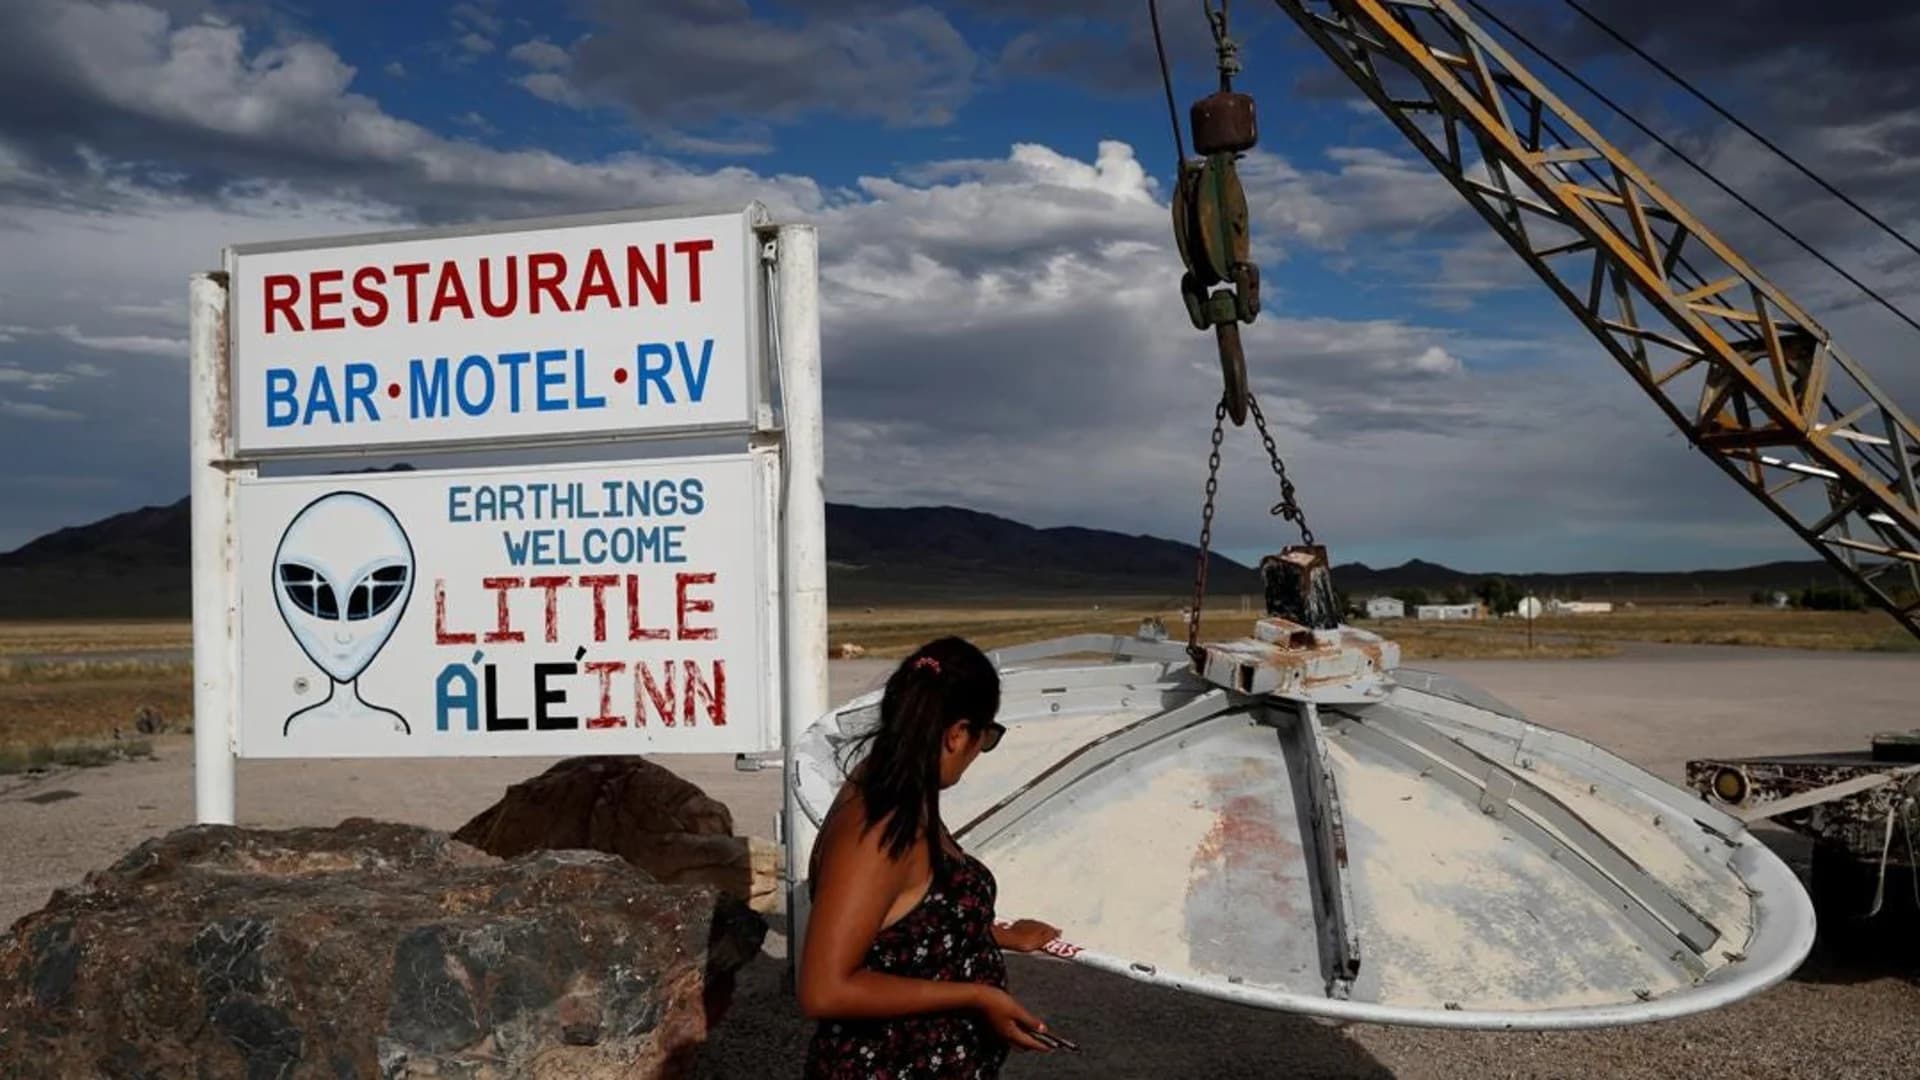 Thousands expected for 3-day Alien Stock festival near Area 51